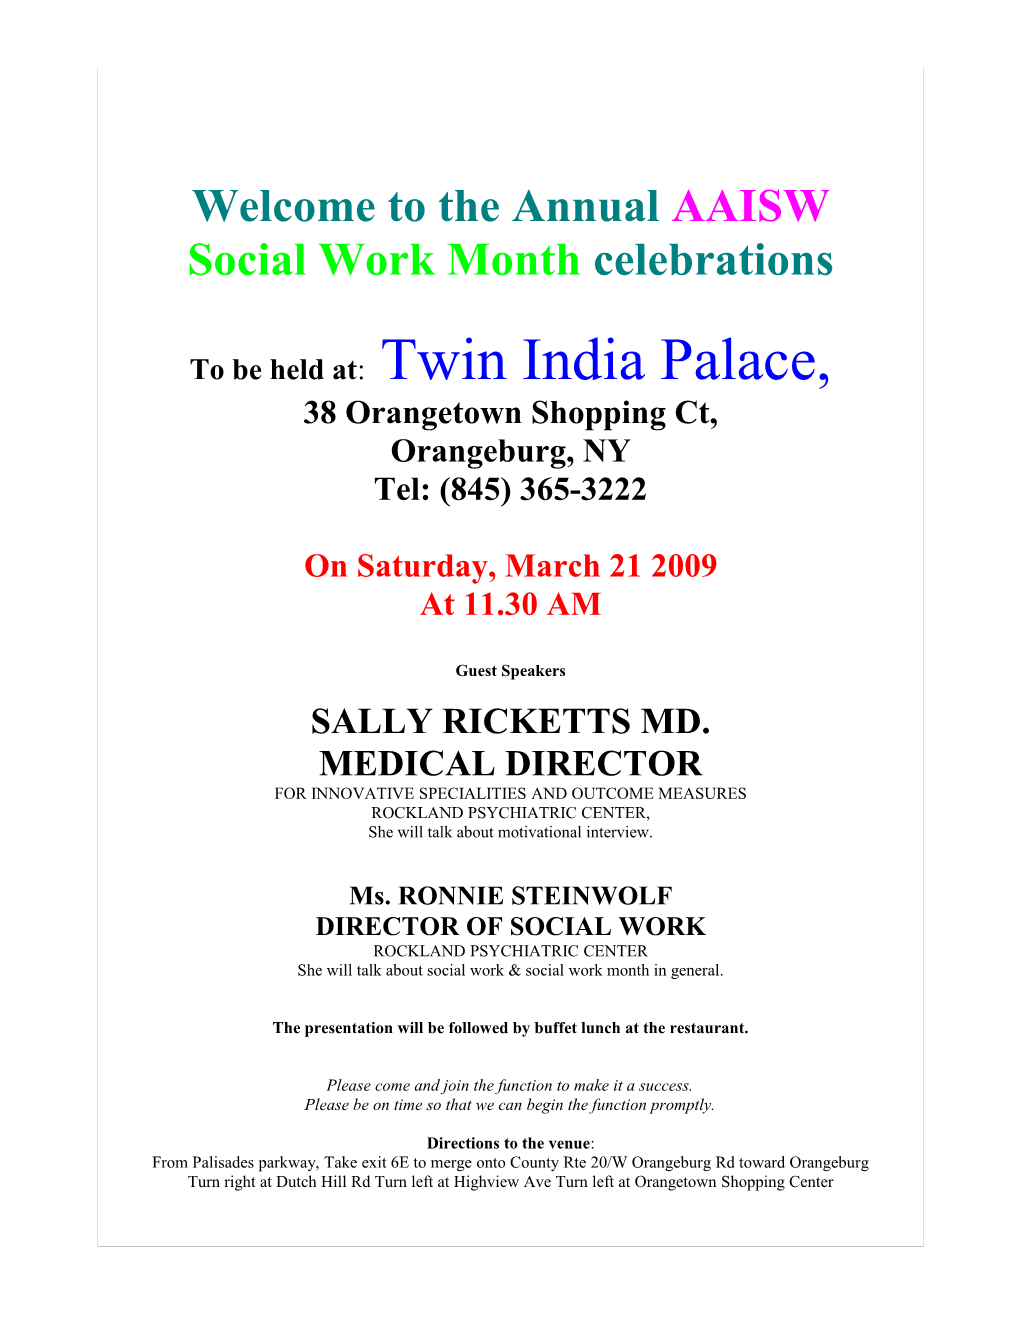 Welcome to the Annual AAISW Social Work Month Celebrations